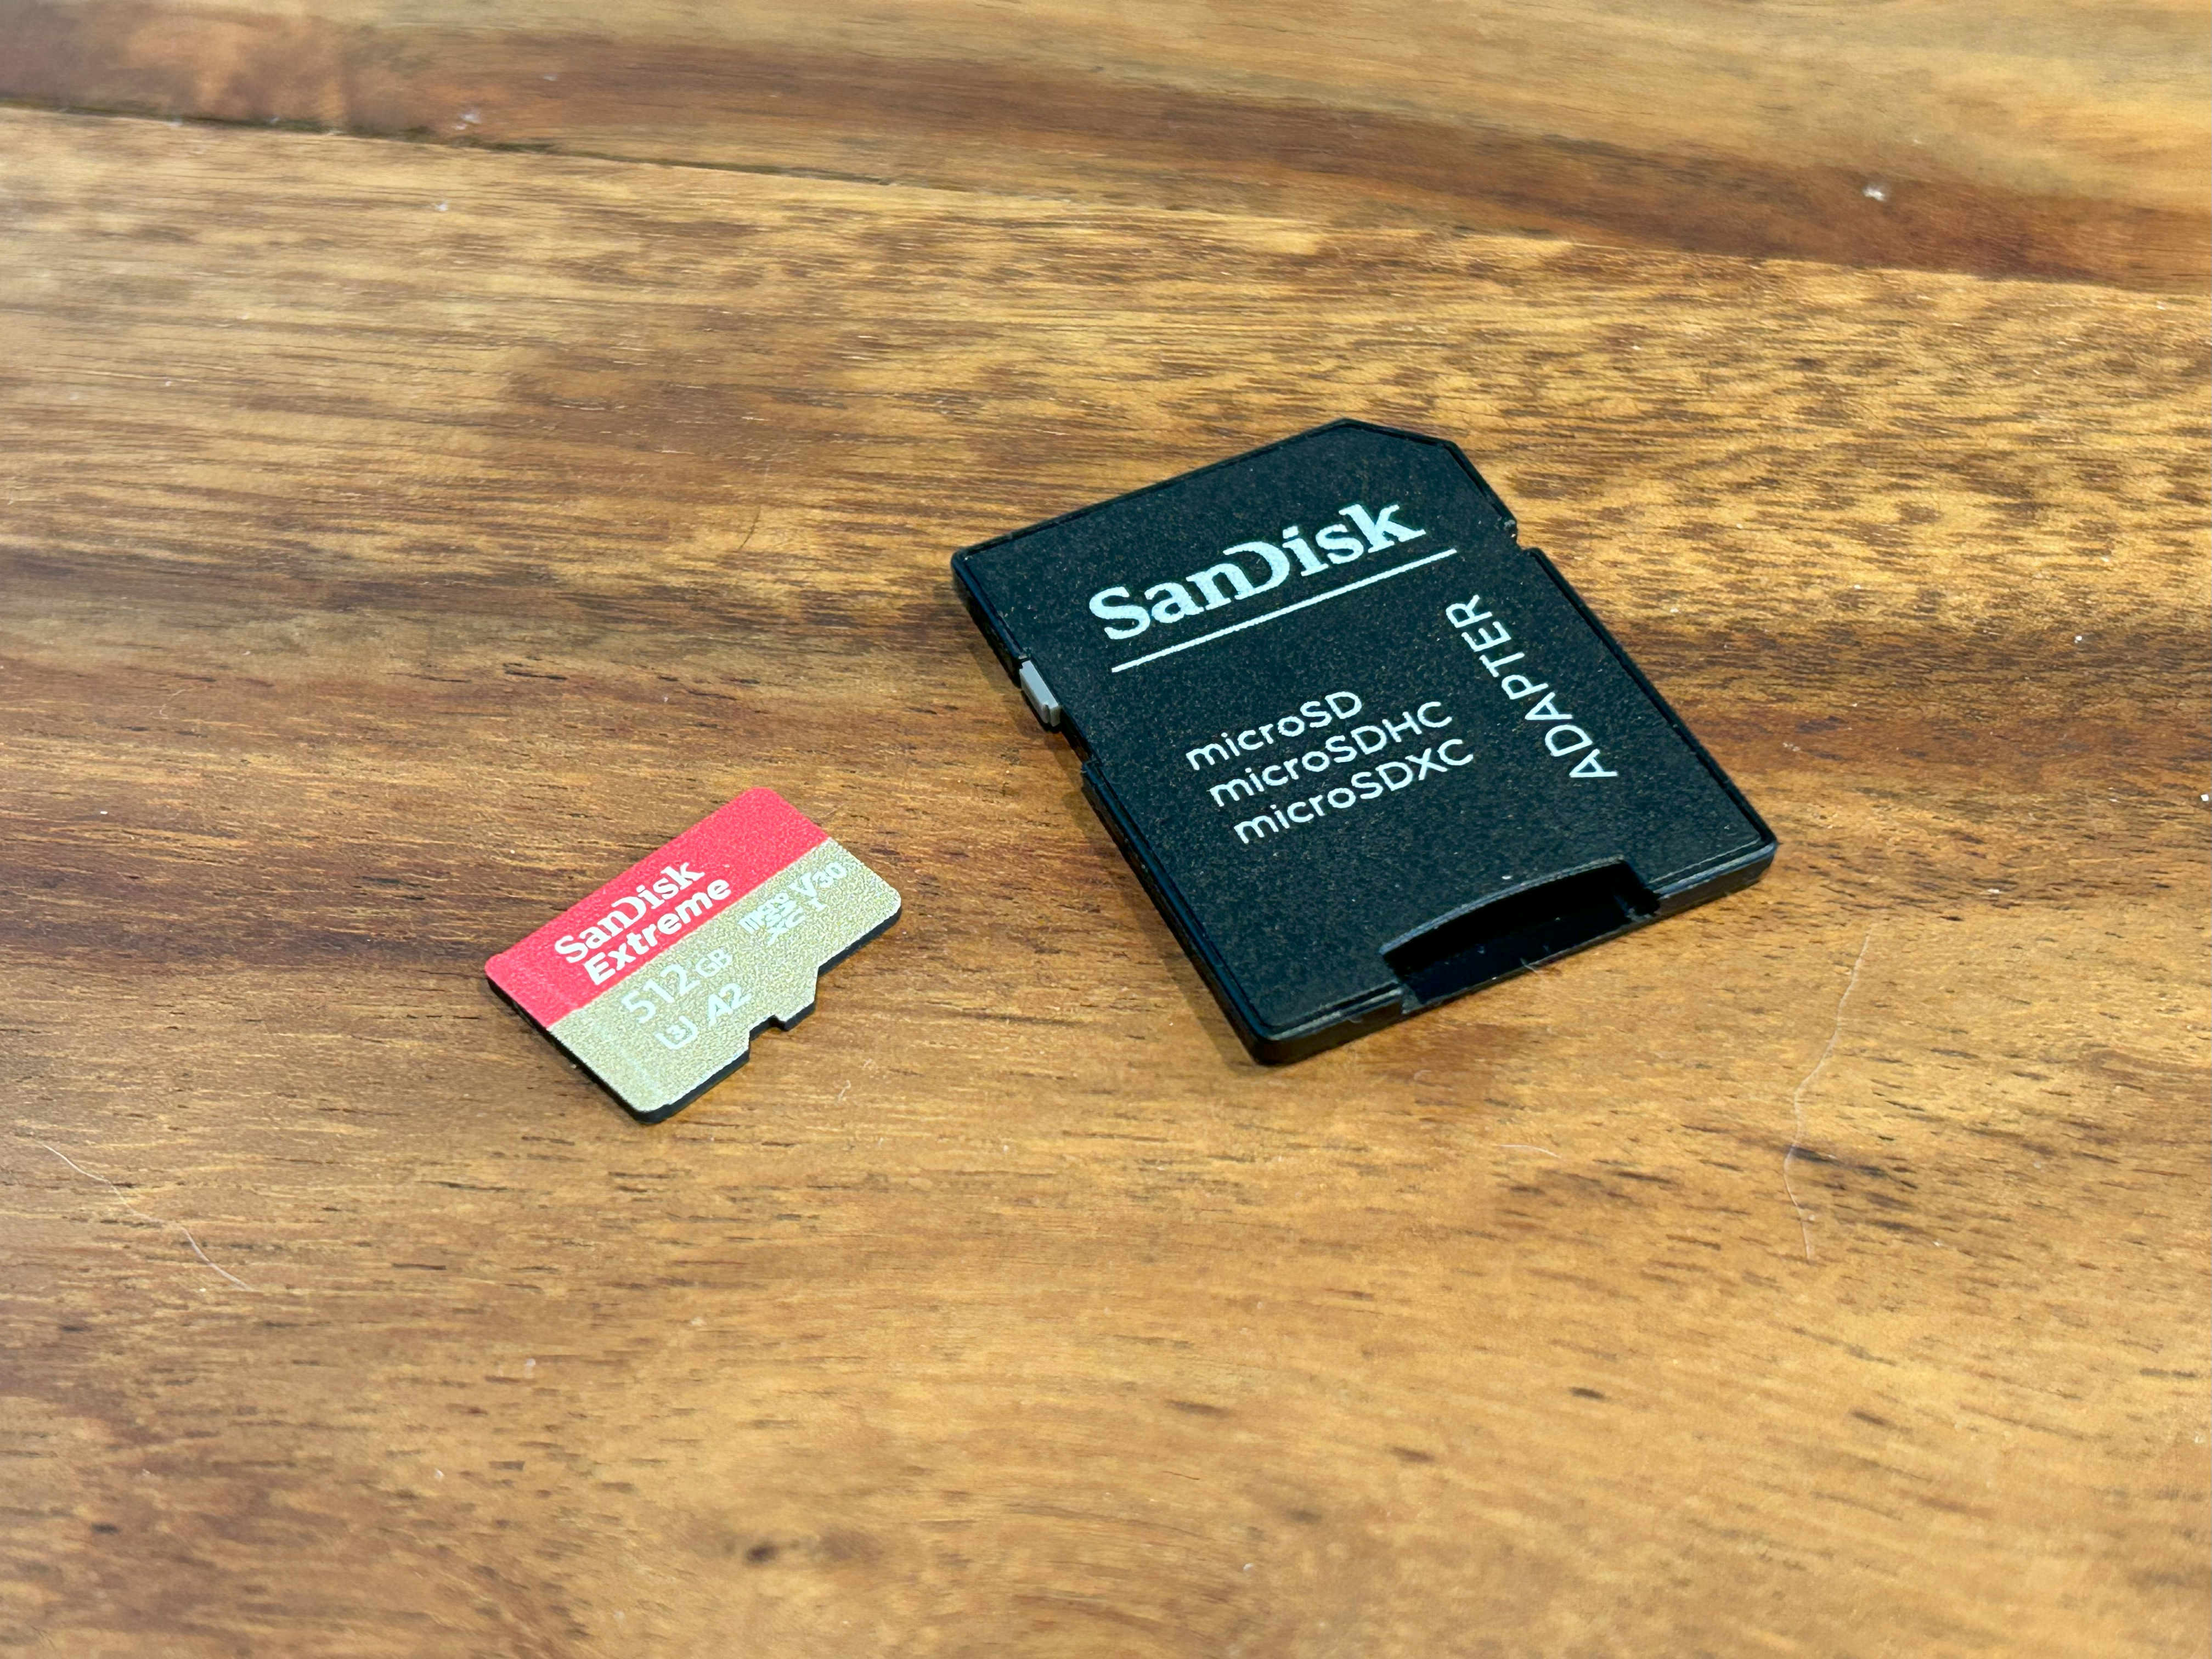 A 512GB microSD card, with an adapter